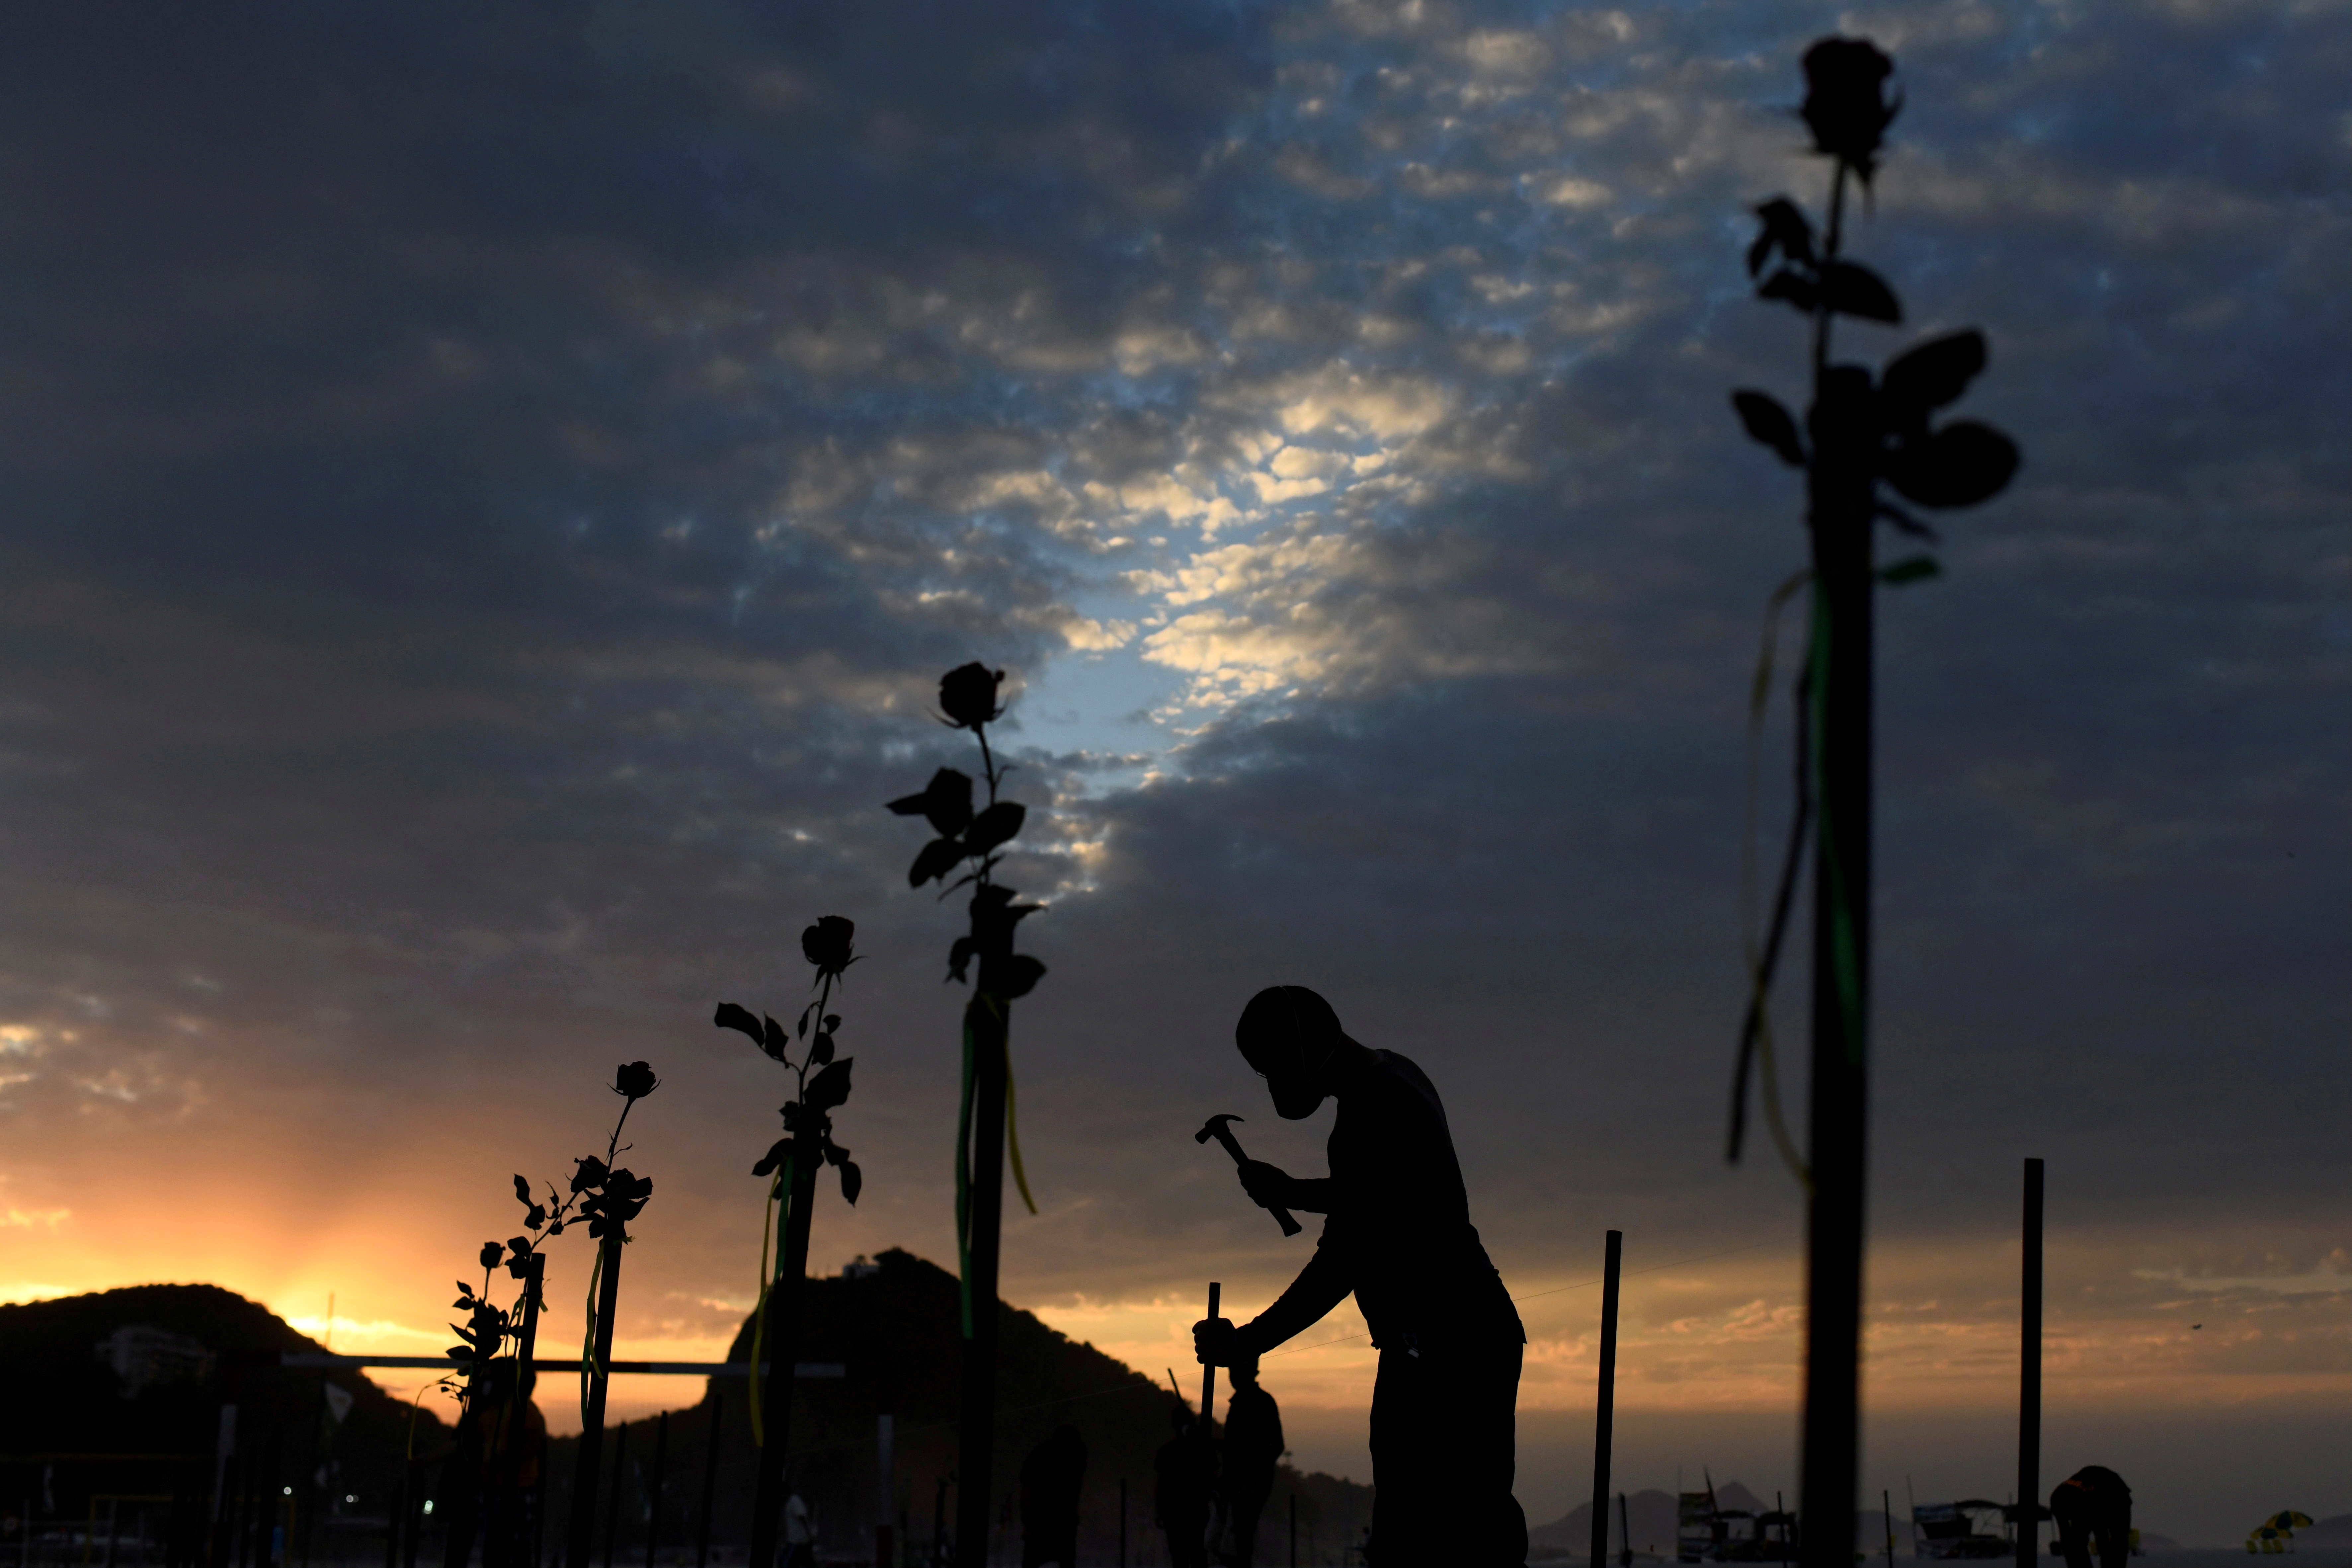 Brazilian NGO pays tribute to the country's COVID-19 victims by laying red flowers along Copacabana beach